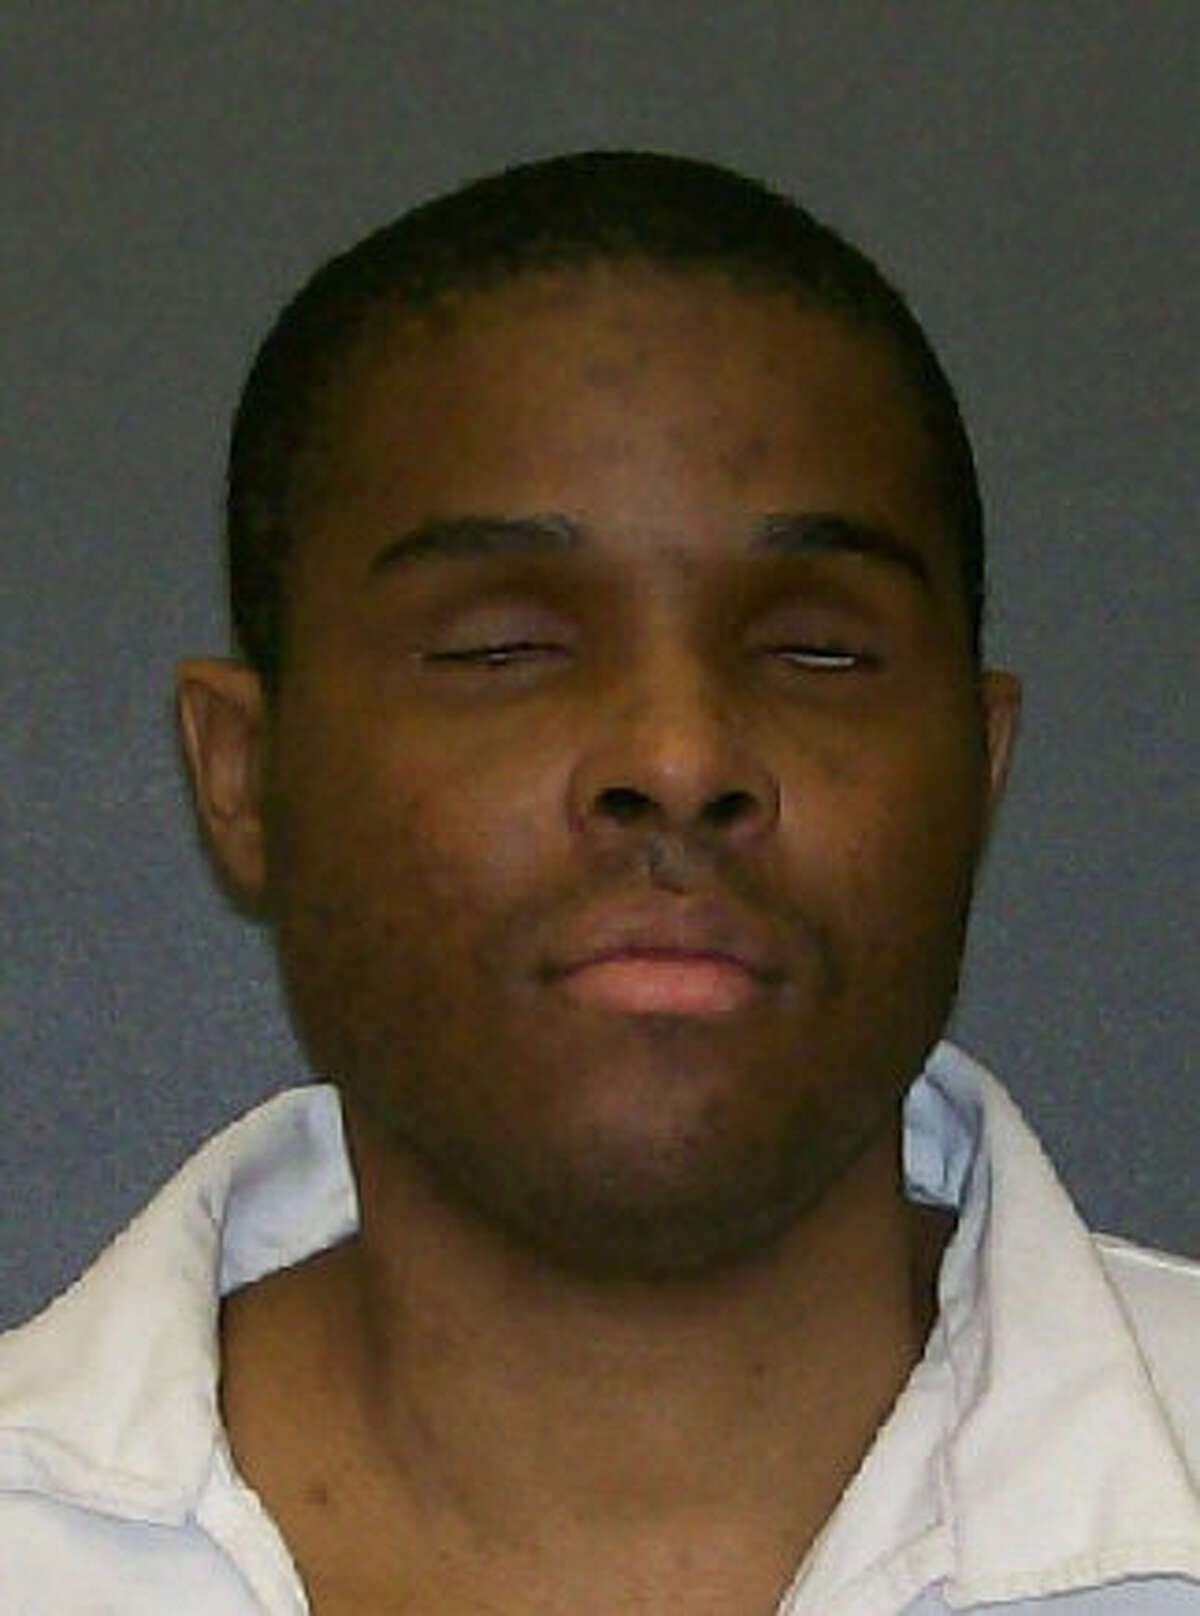 Lawyers argue whether Texas death row inmate who ate own eyeball too